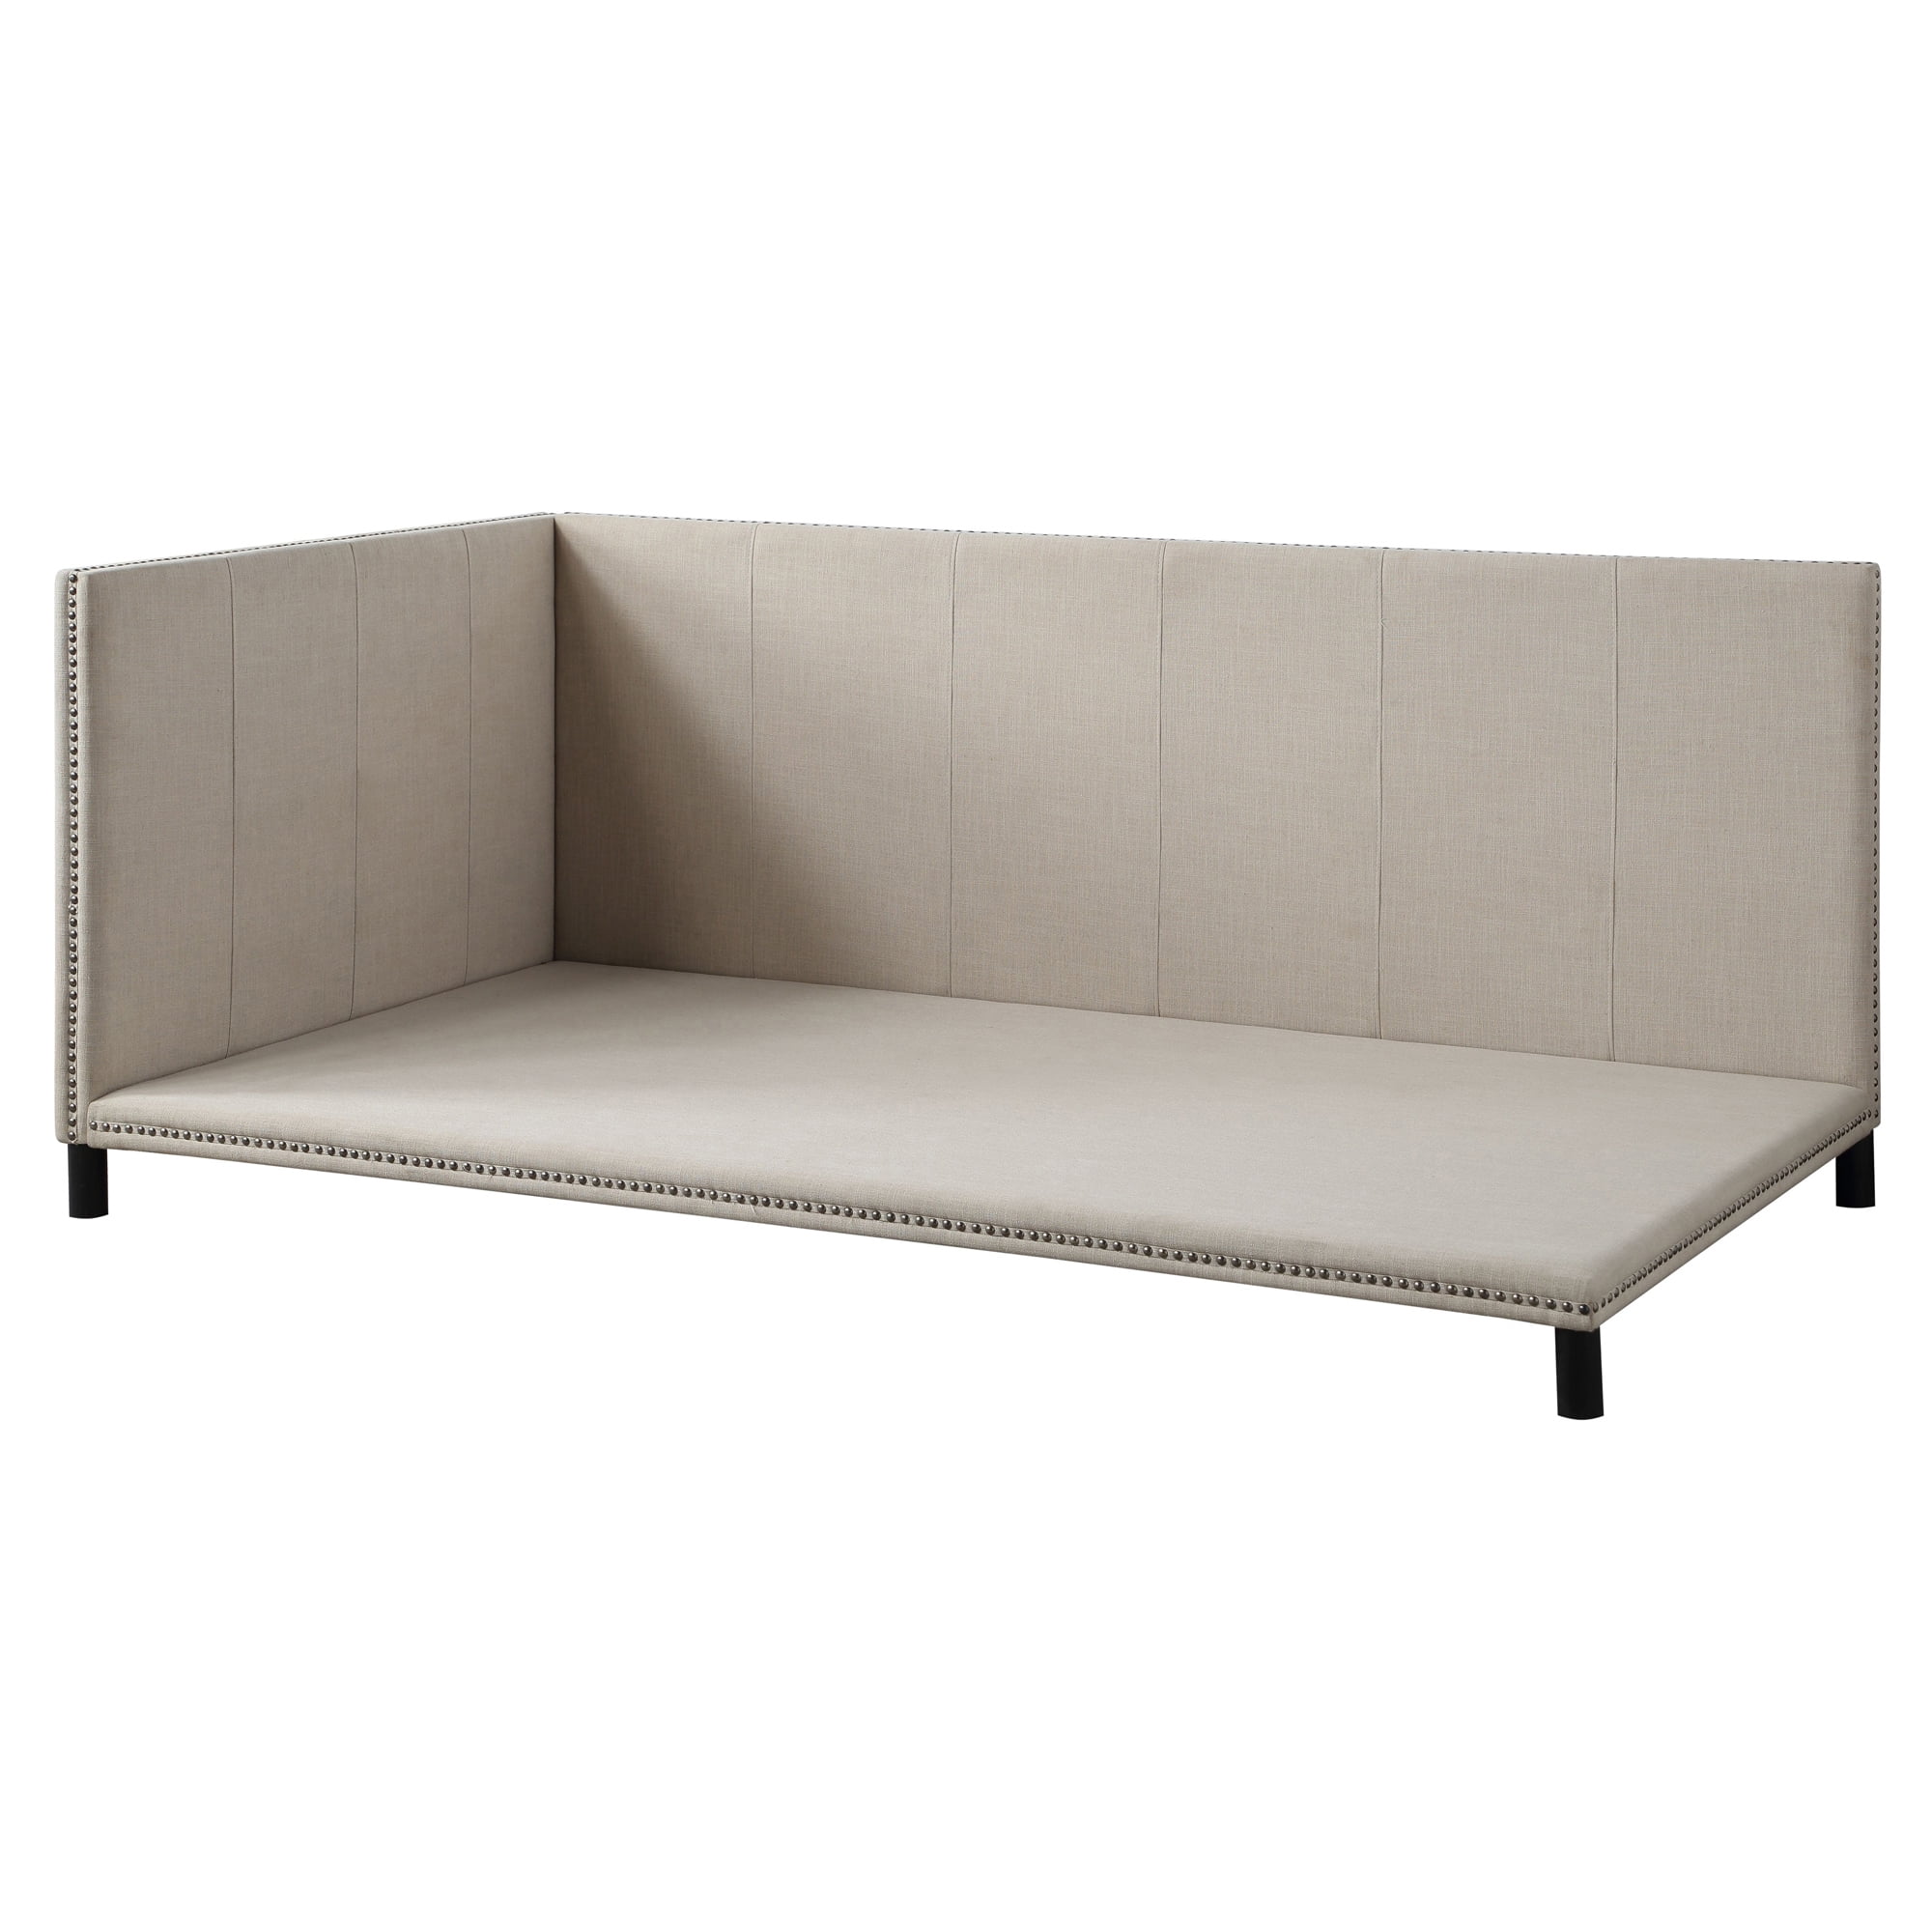 Picture of Acme Furniture 39715 78 x 57 x 32 in. Yinbella Daybed, Beige Linen